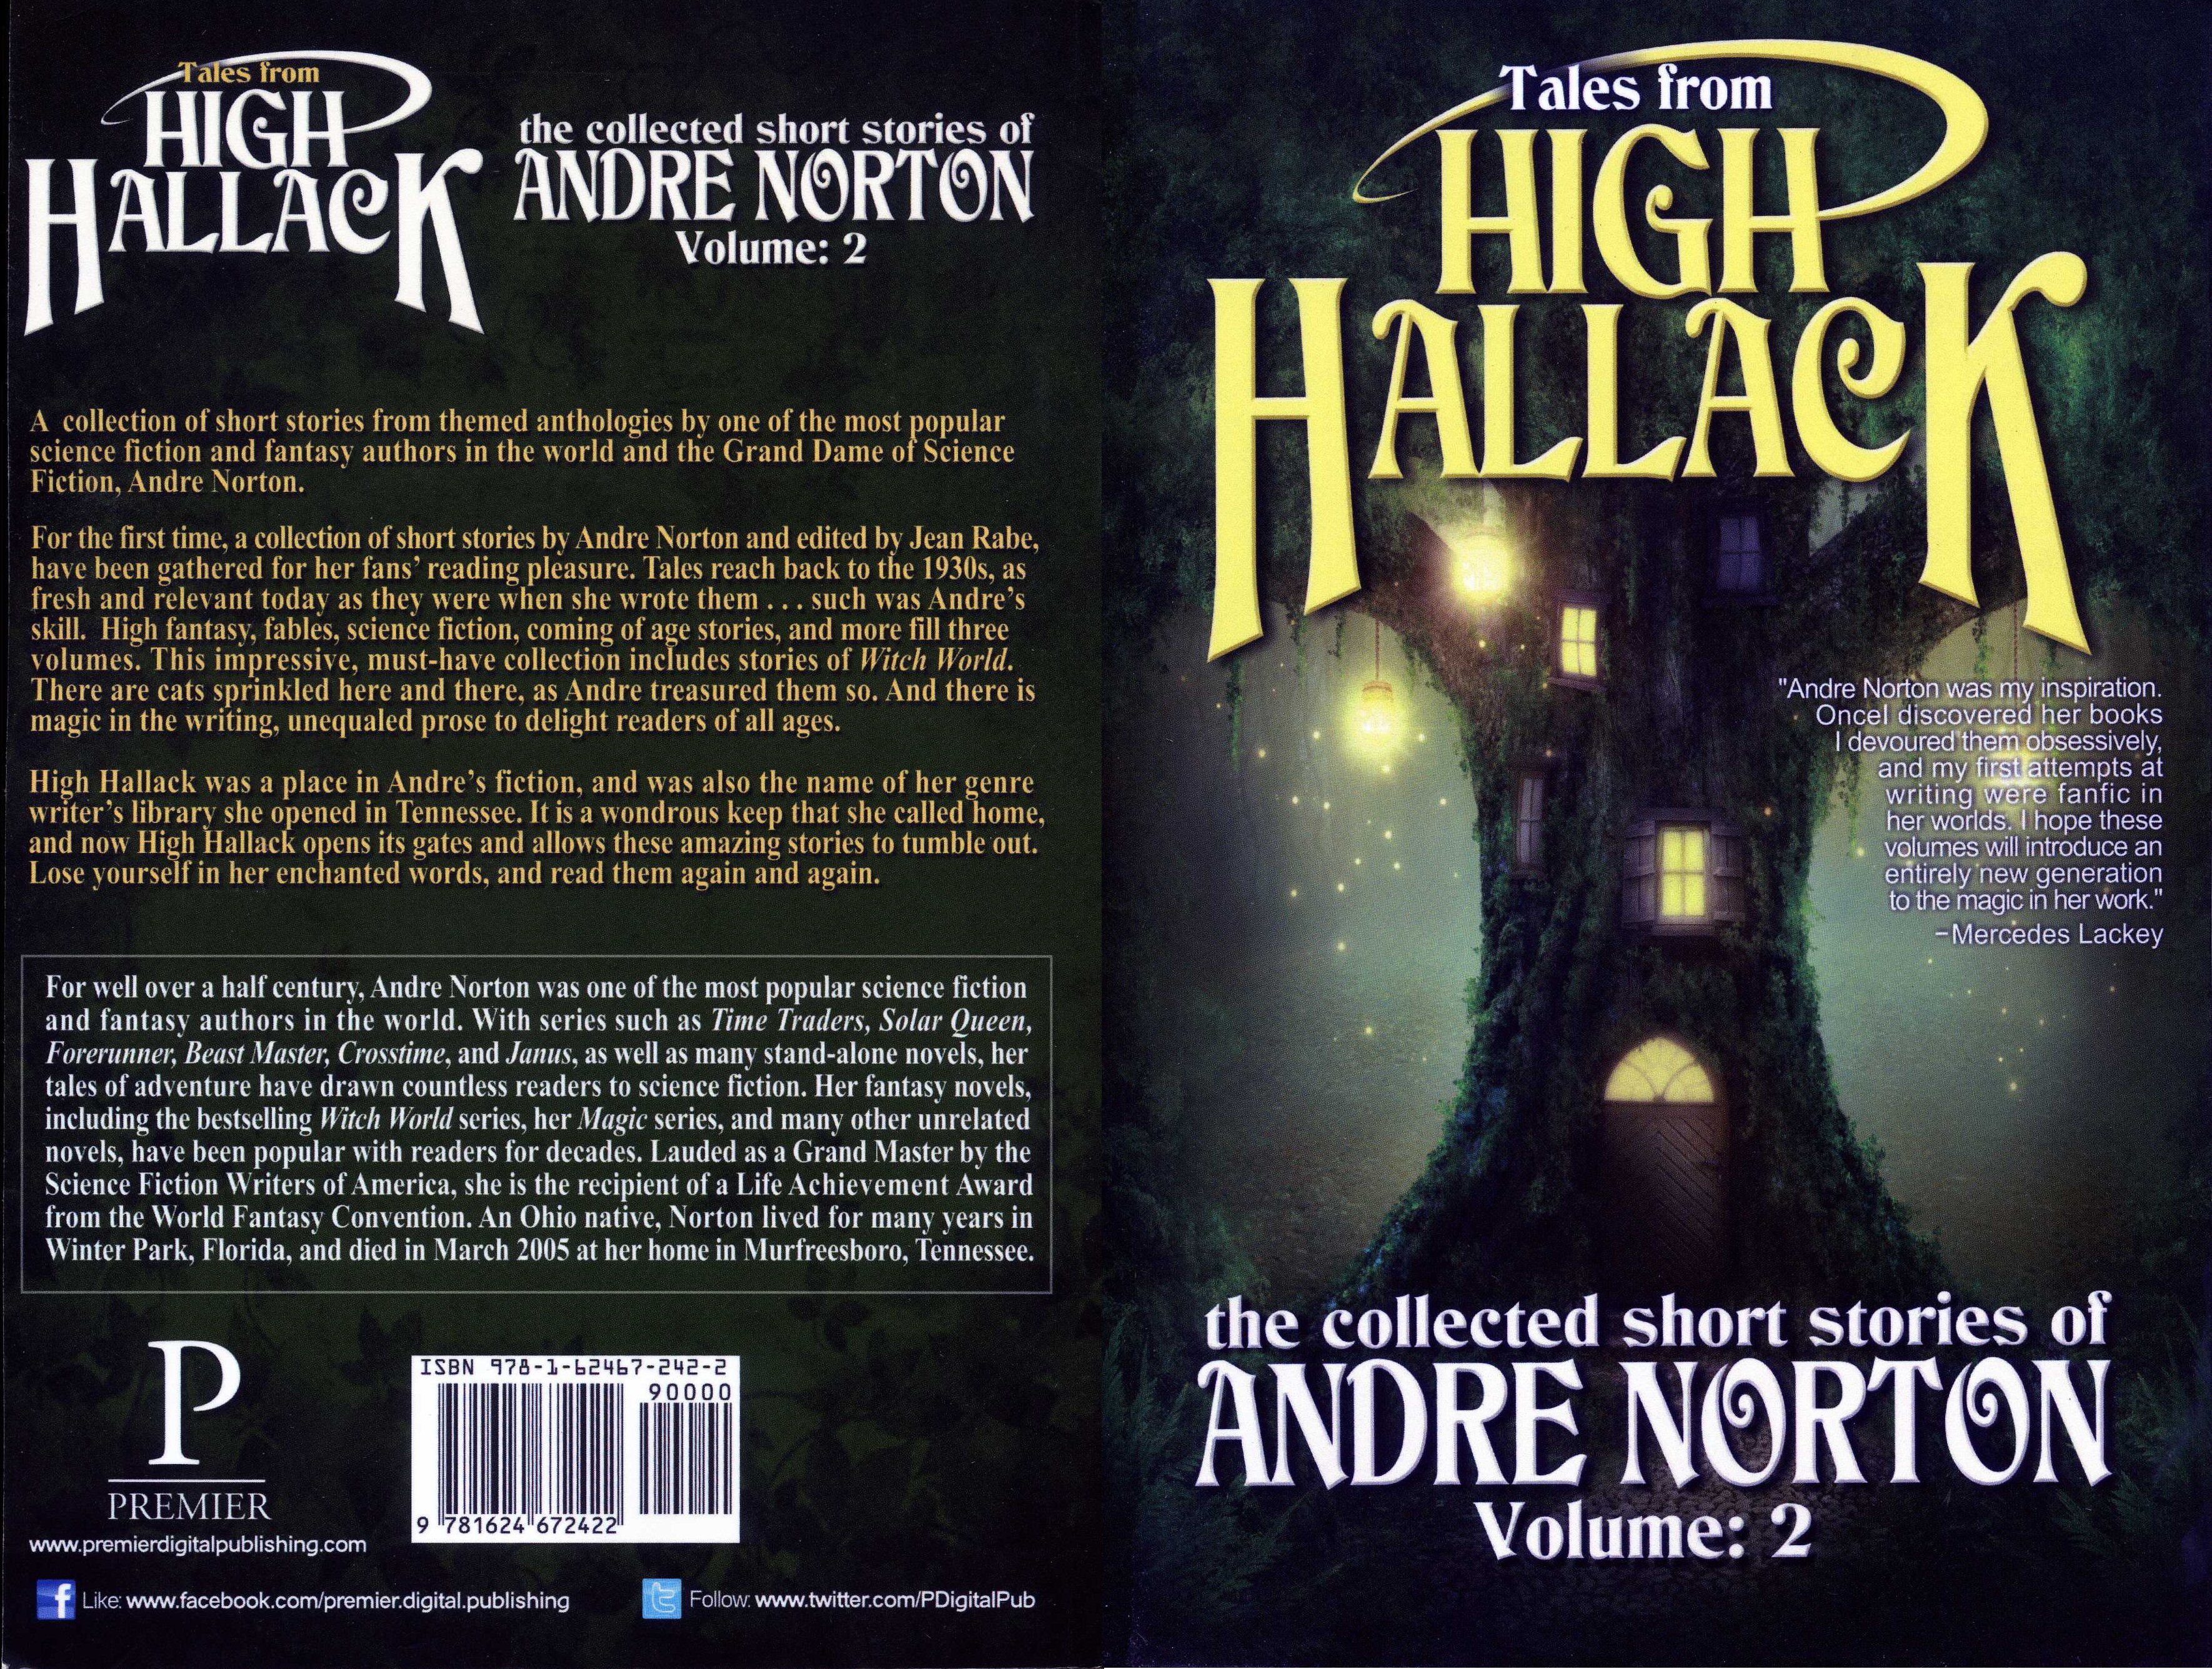 tales from high hallack vol2